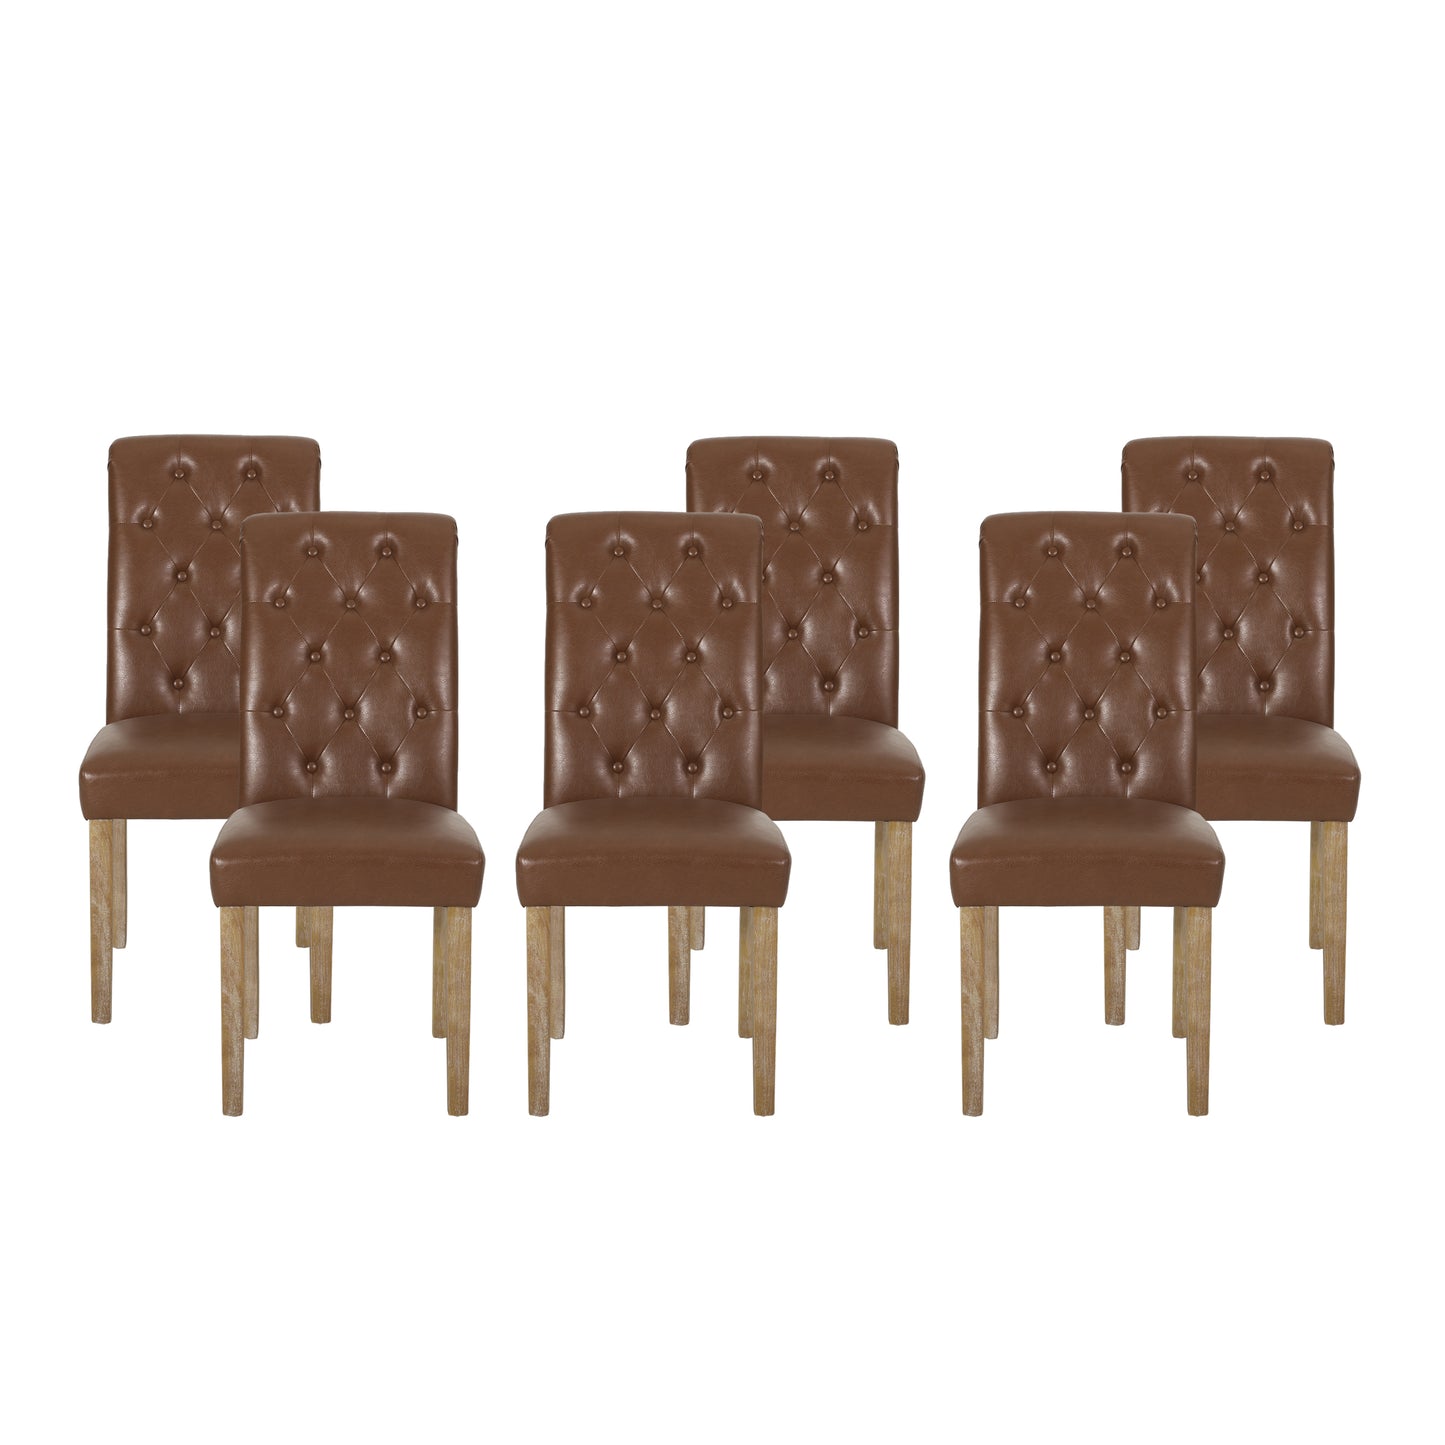 Larkspur Contemporary Faux Leather Tufted Dining Chairs, Set of 6